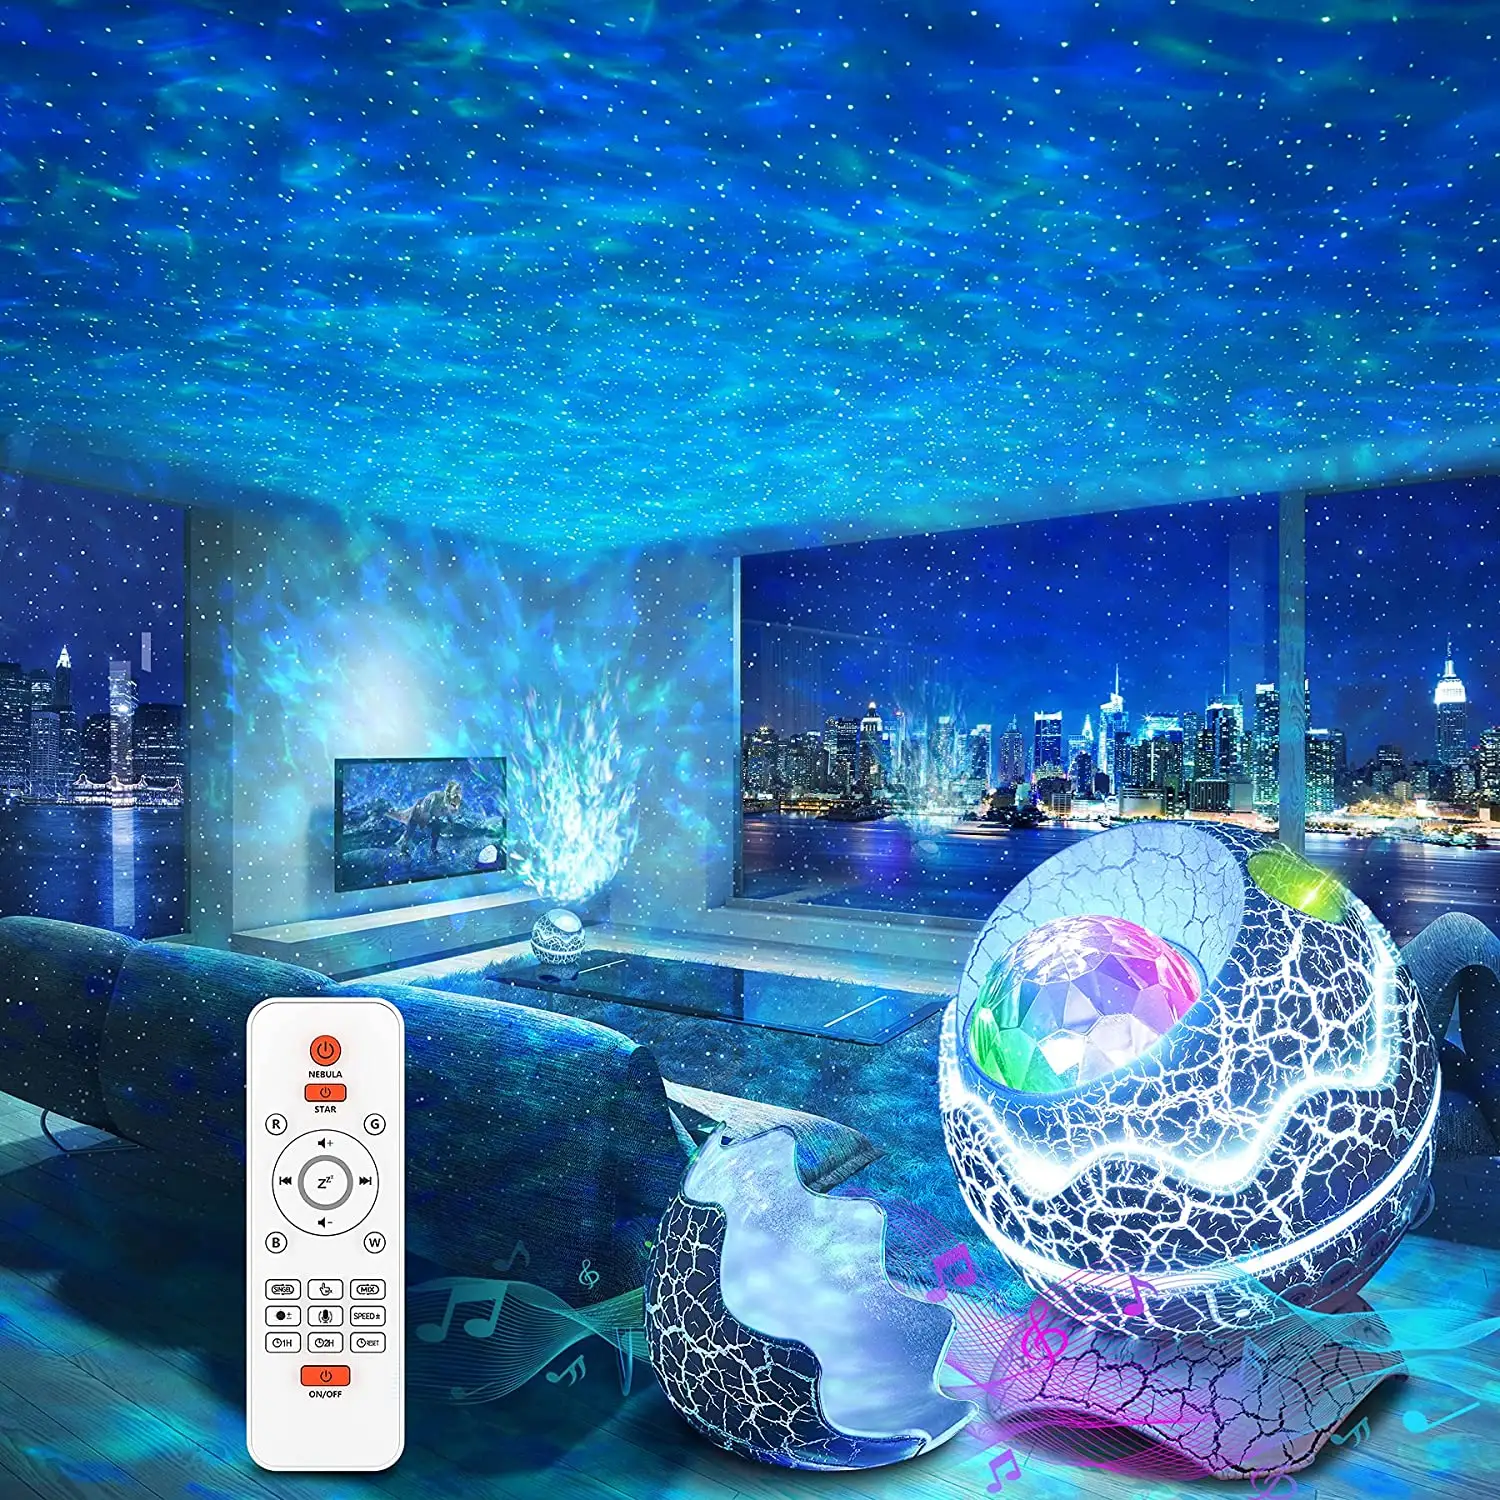 Star Galaxy Projector Remote Control White Noise BT Speaker 14 Colors LED Night Lights for Kids Room Home Party Decor Bedroom